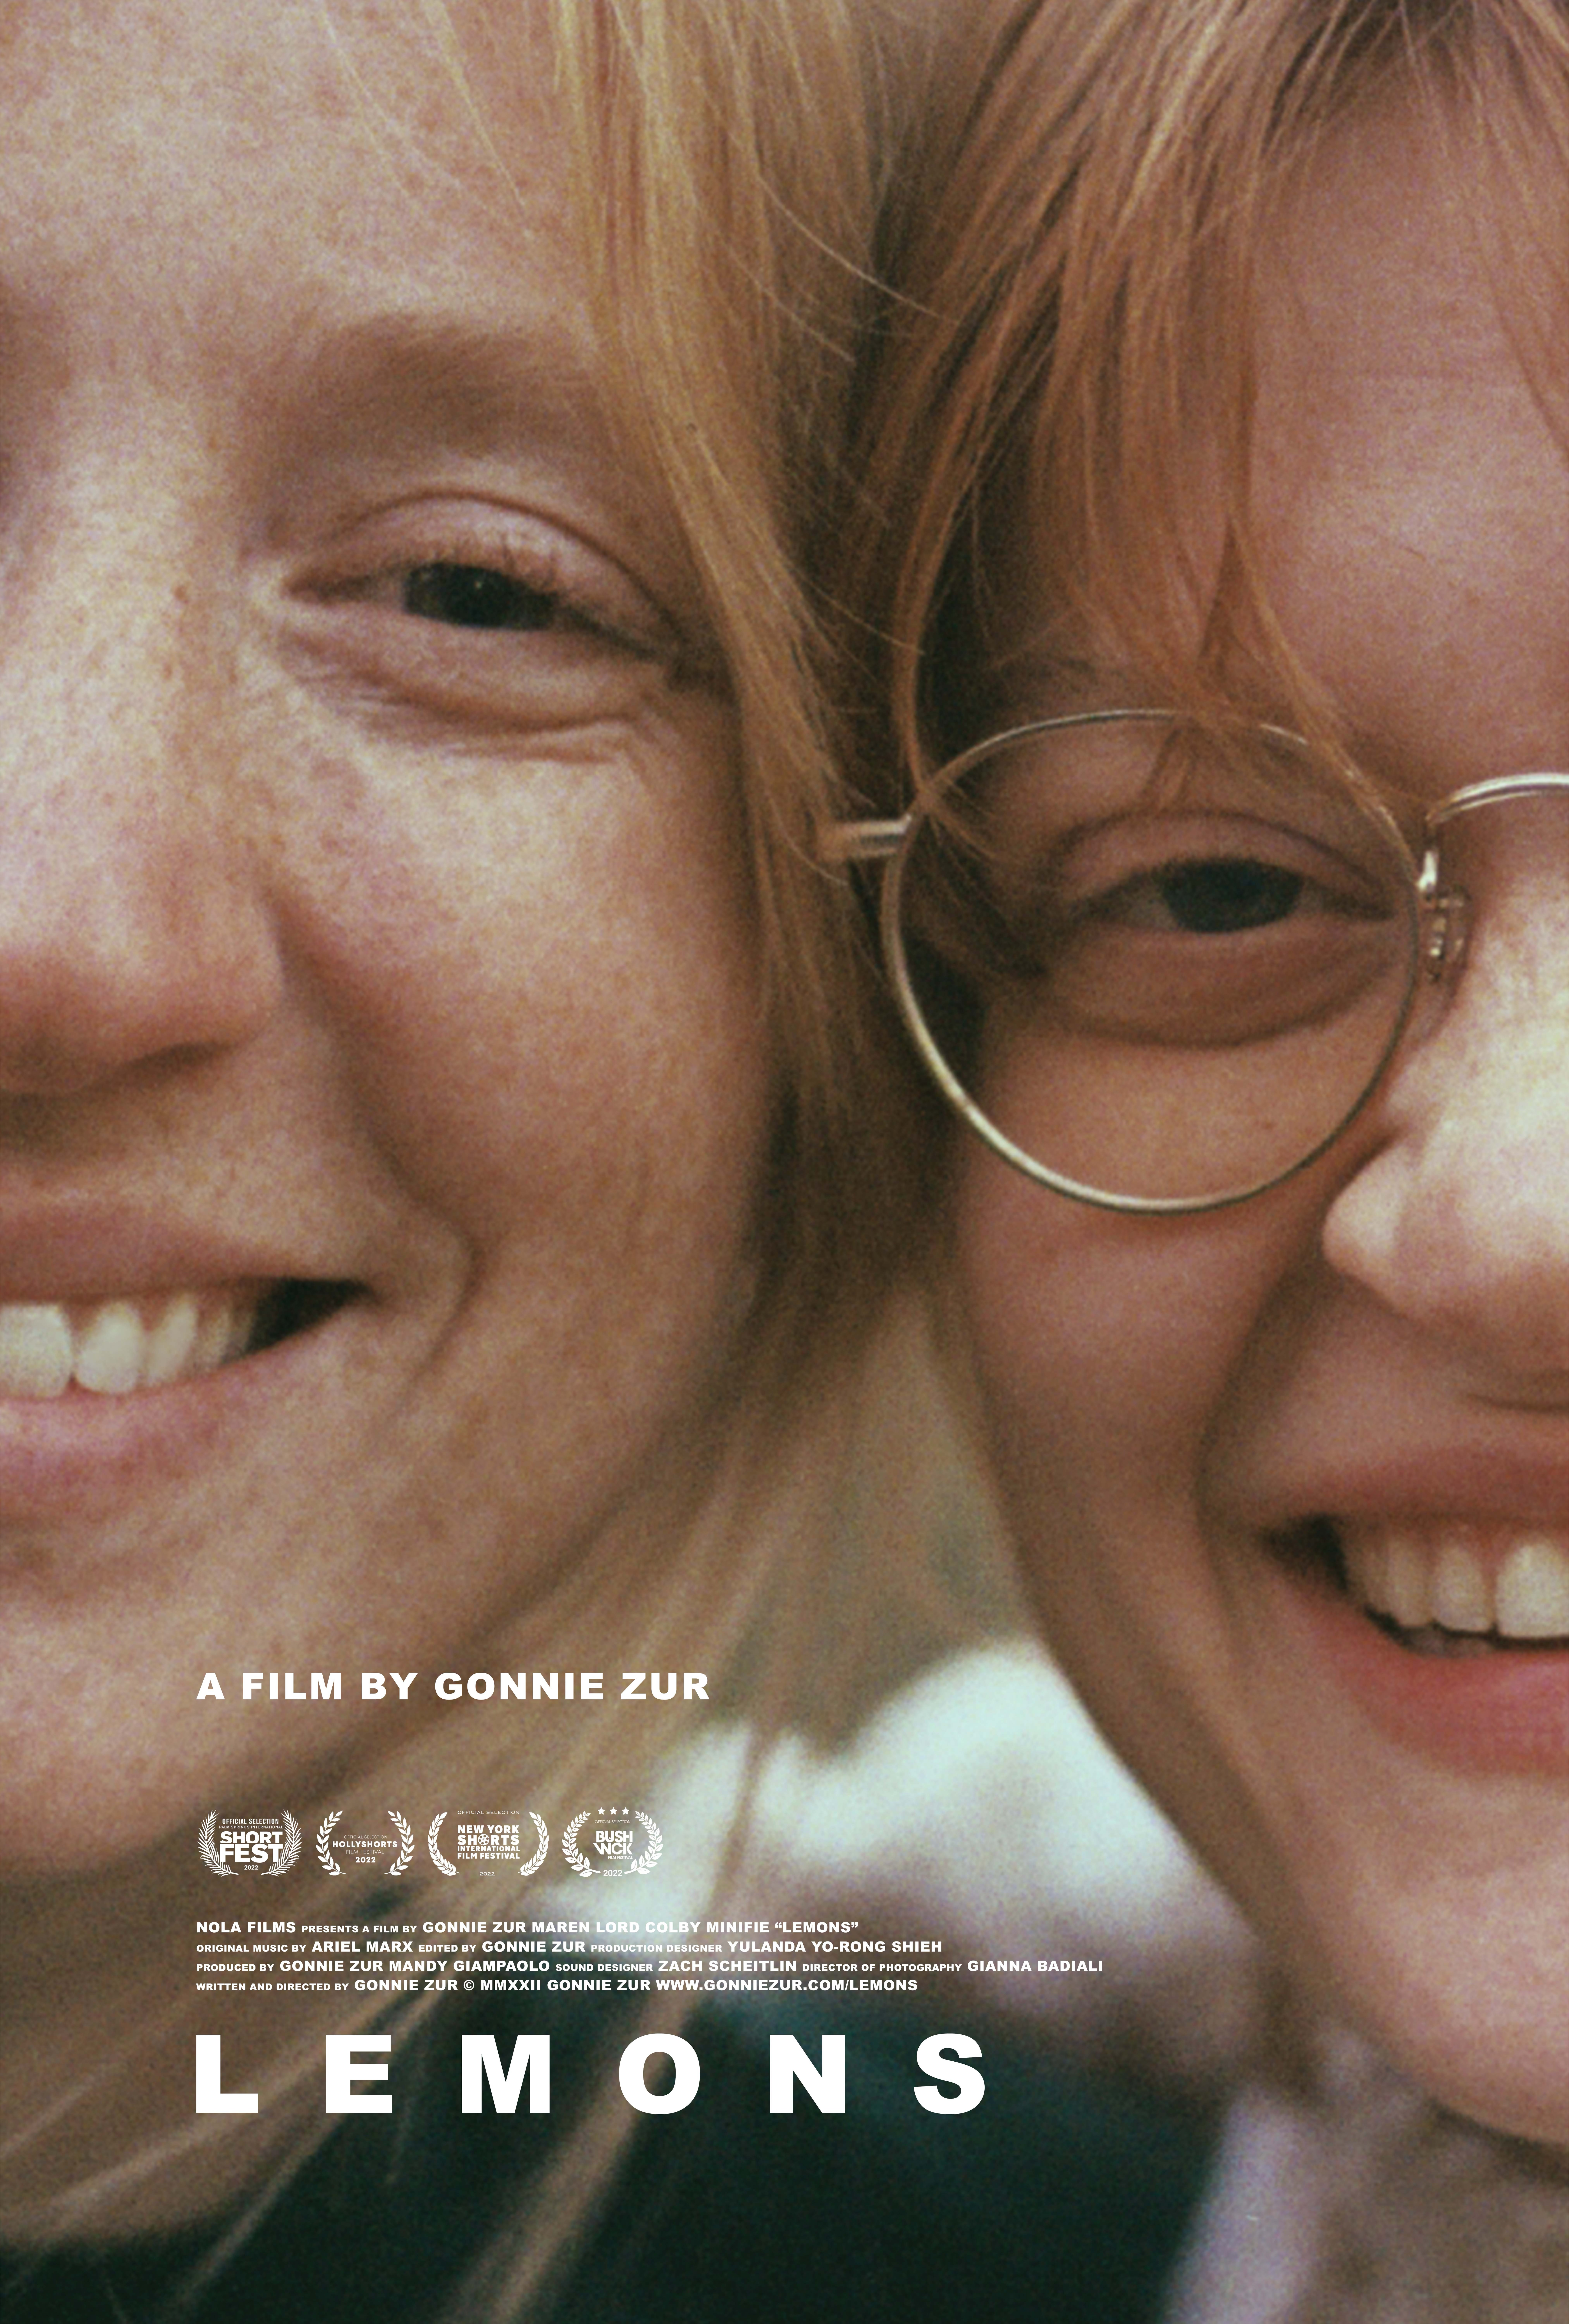 Poster for Gonnie Zur's film Lemons shows two people in close up smiling at the camera.